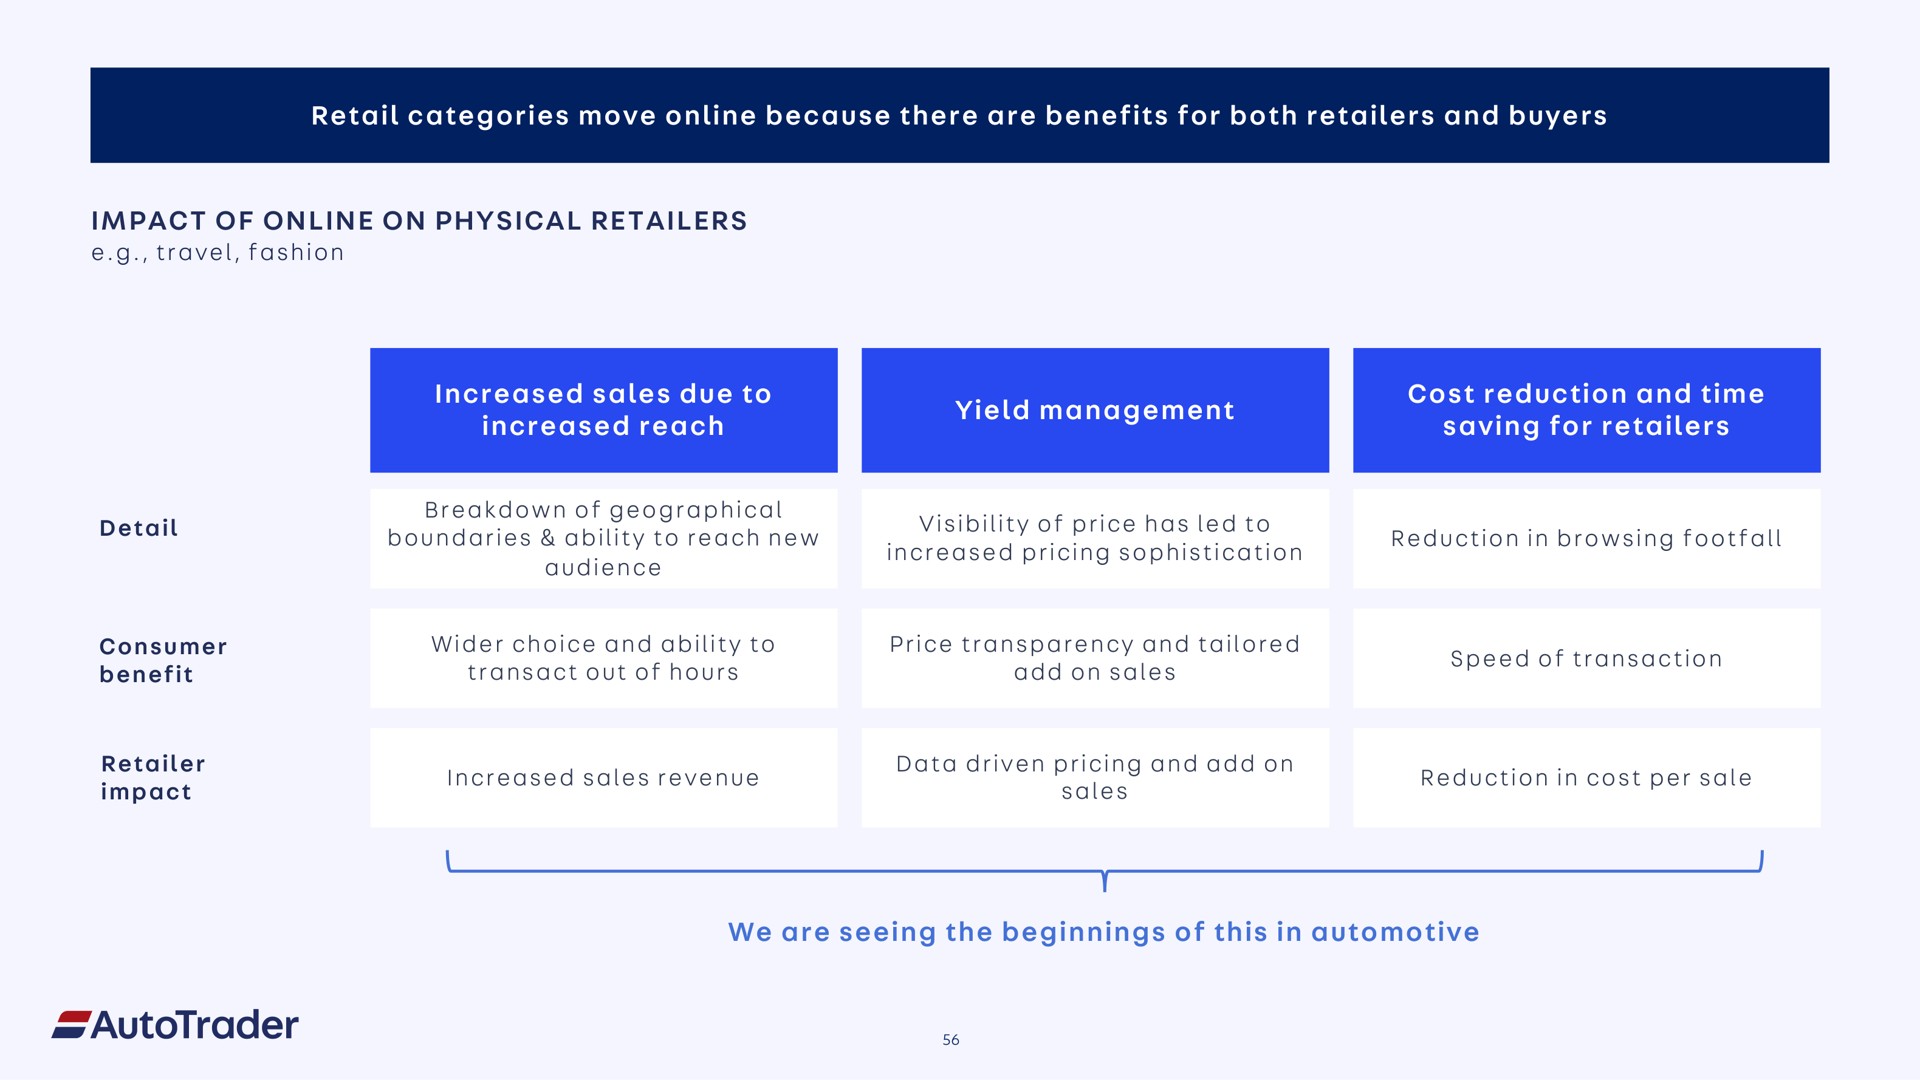 retail categories move because there are benefits for both retailers and buyers impact of on physical retailers increased sales due to increased reach yield management cost reduction and time saving for retailers we are seeing the beginnings of this in automotive | Auto Trader Group